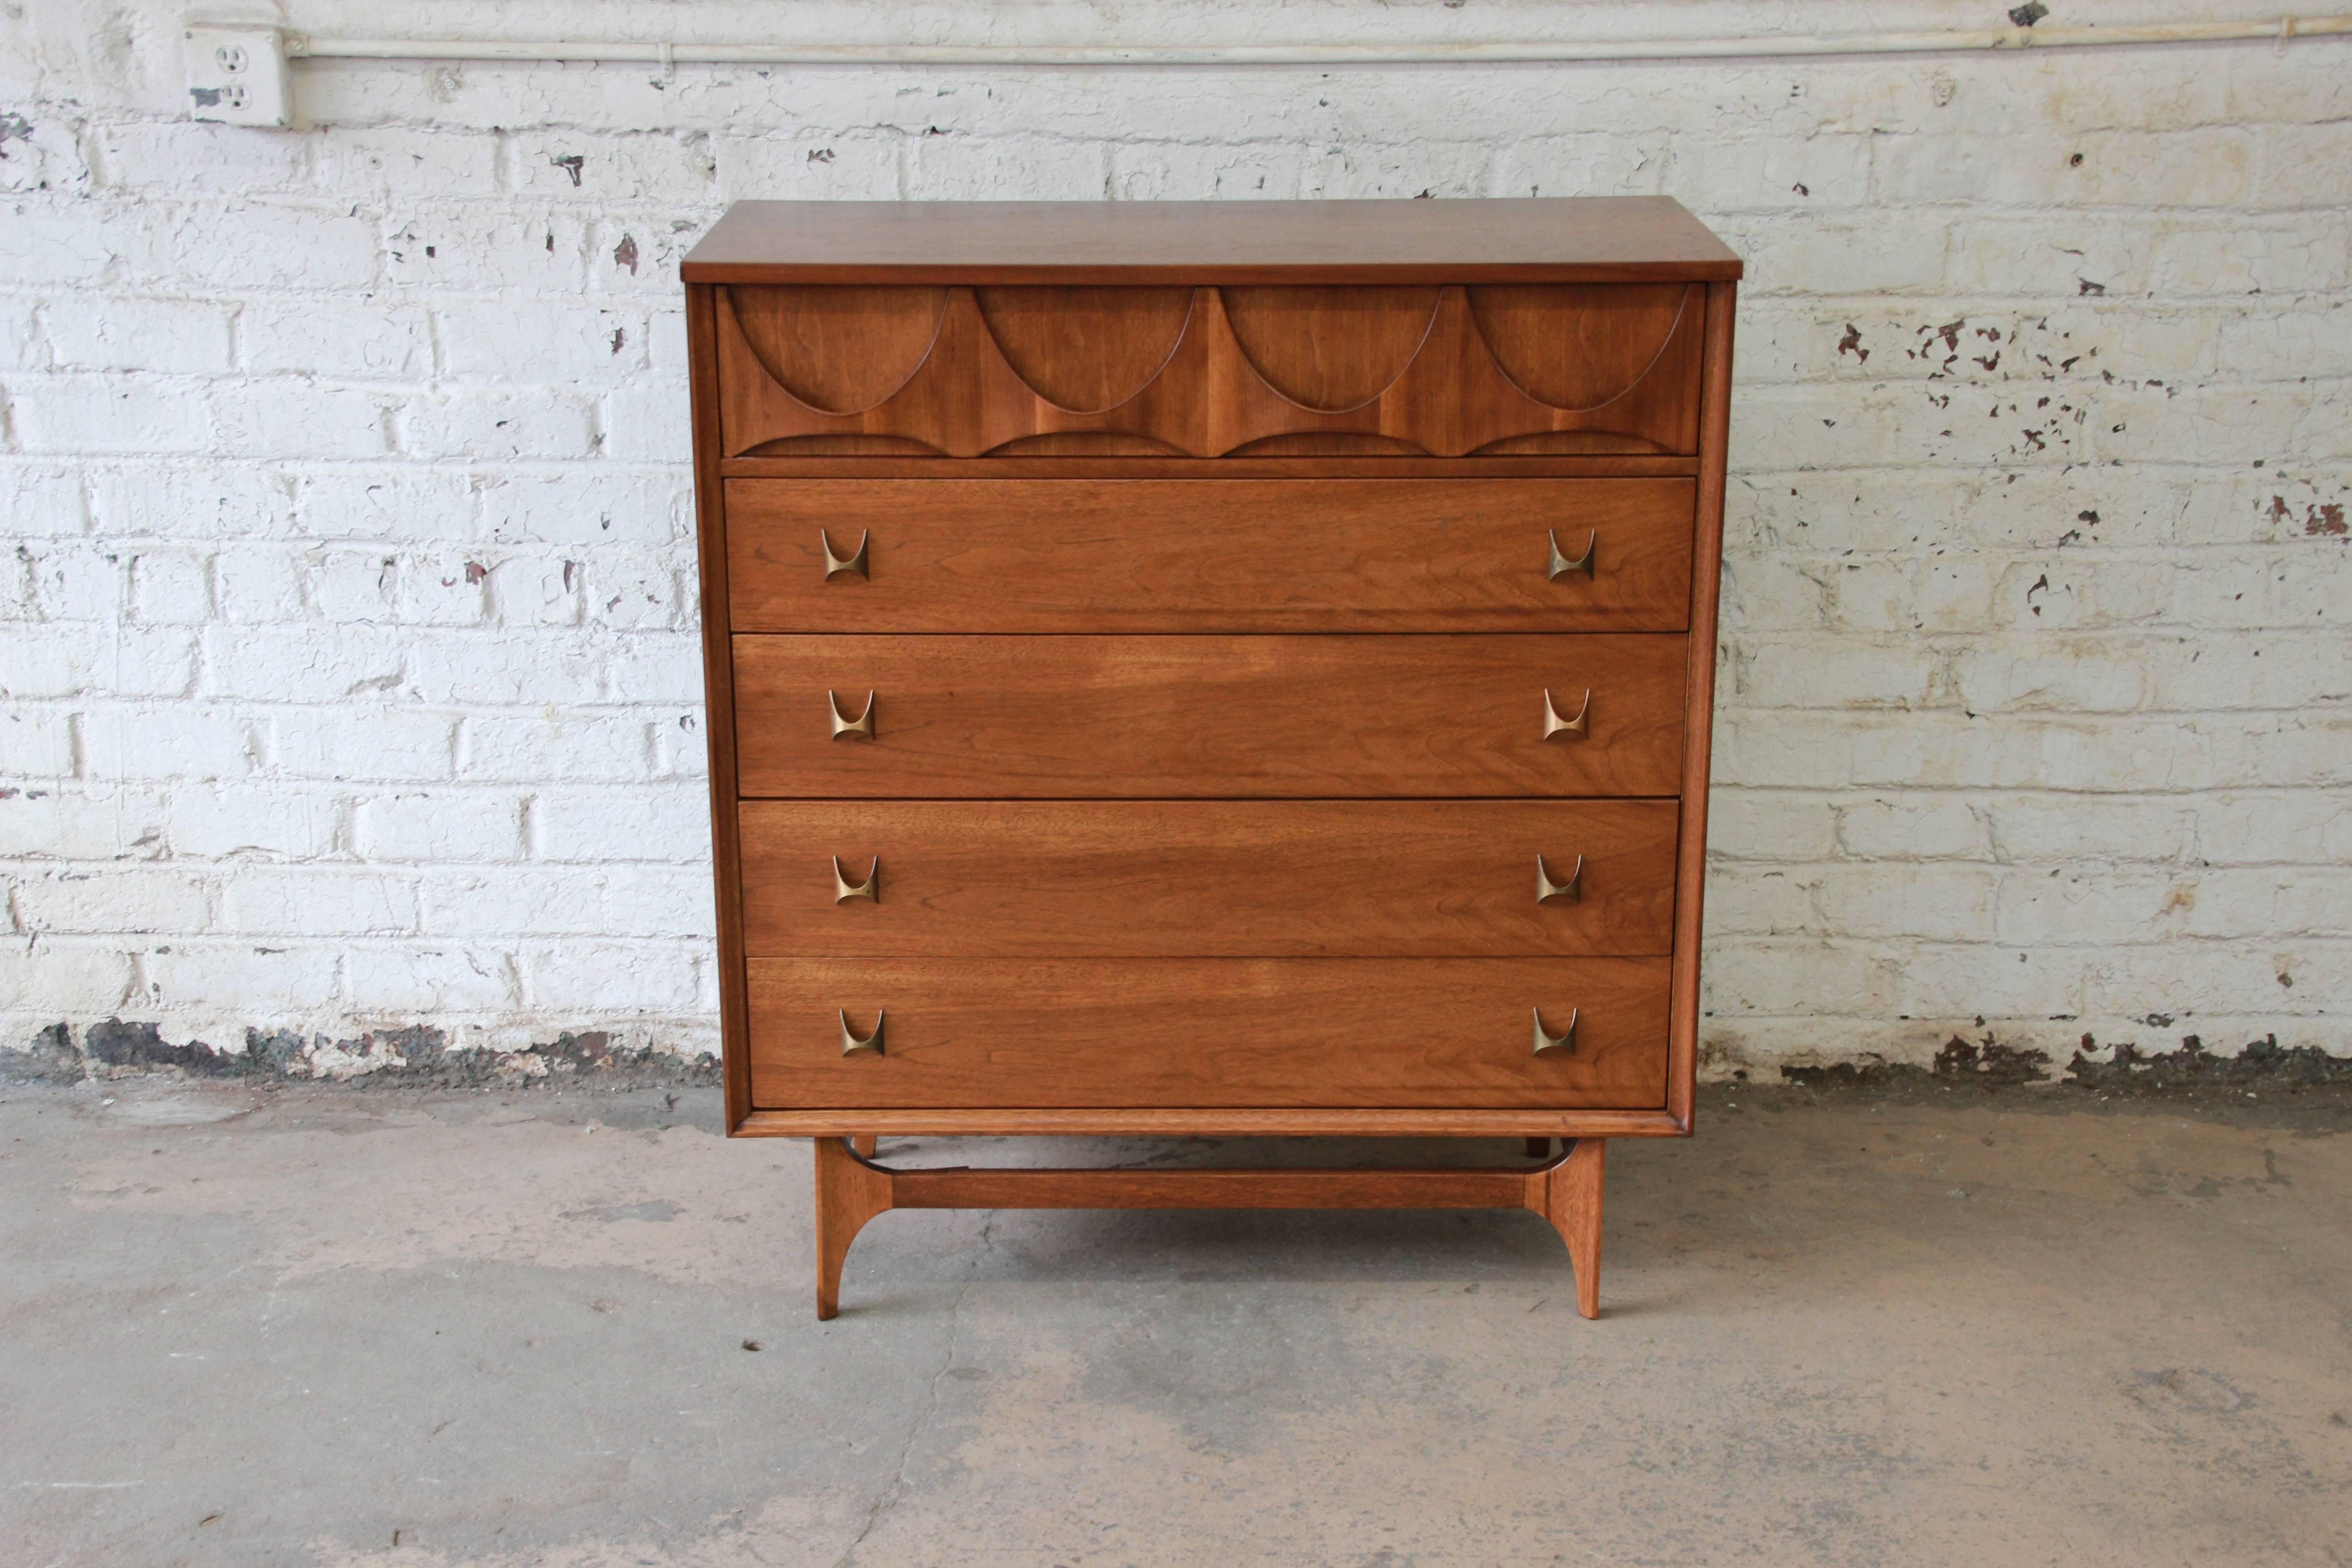 An iconic Broyhill Brasilia Mid-Century Modern sculpted walnut five-drawer highboy dresser. The dresser features gorgeous walnut wood grain, with sculpted arches and original pulls. It offers ample room for storage, with five deep dovetailed